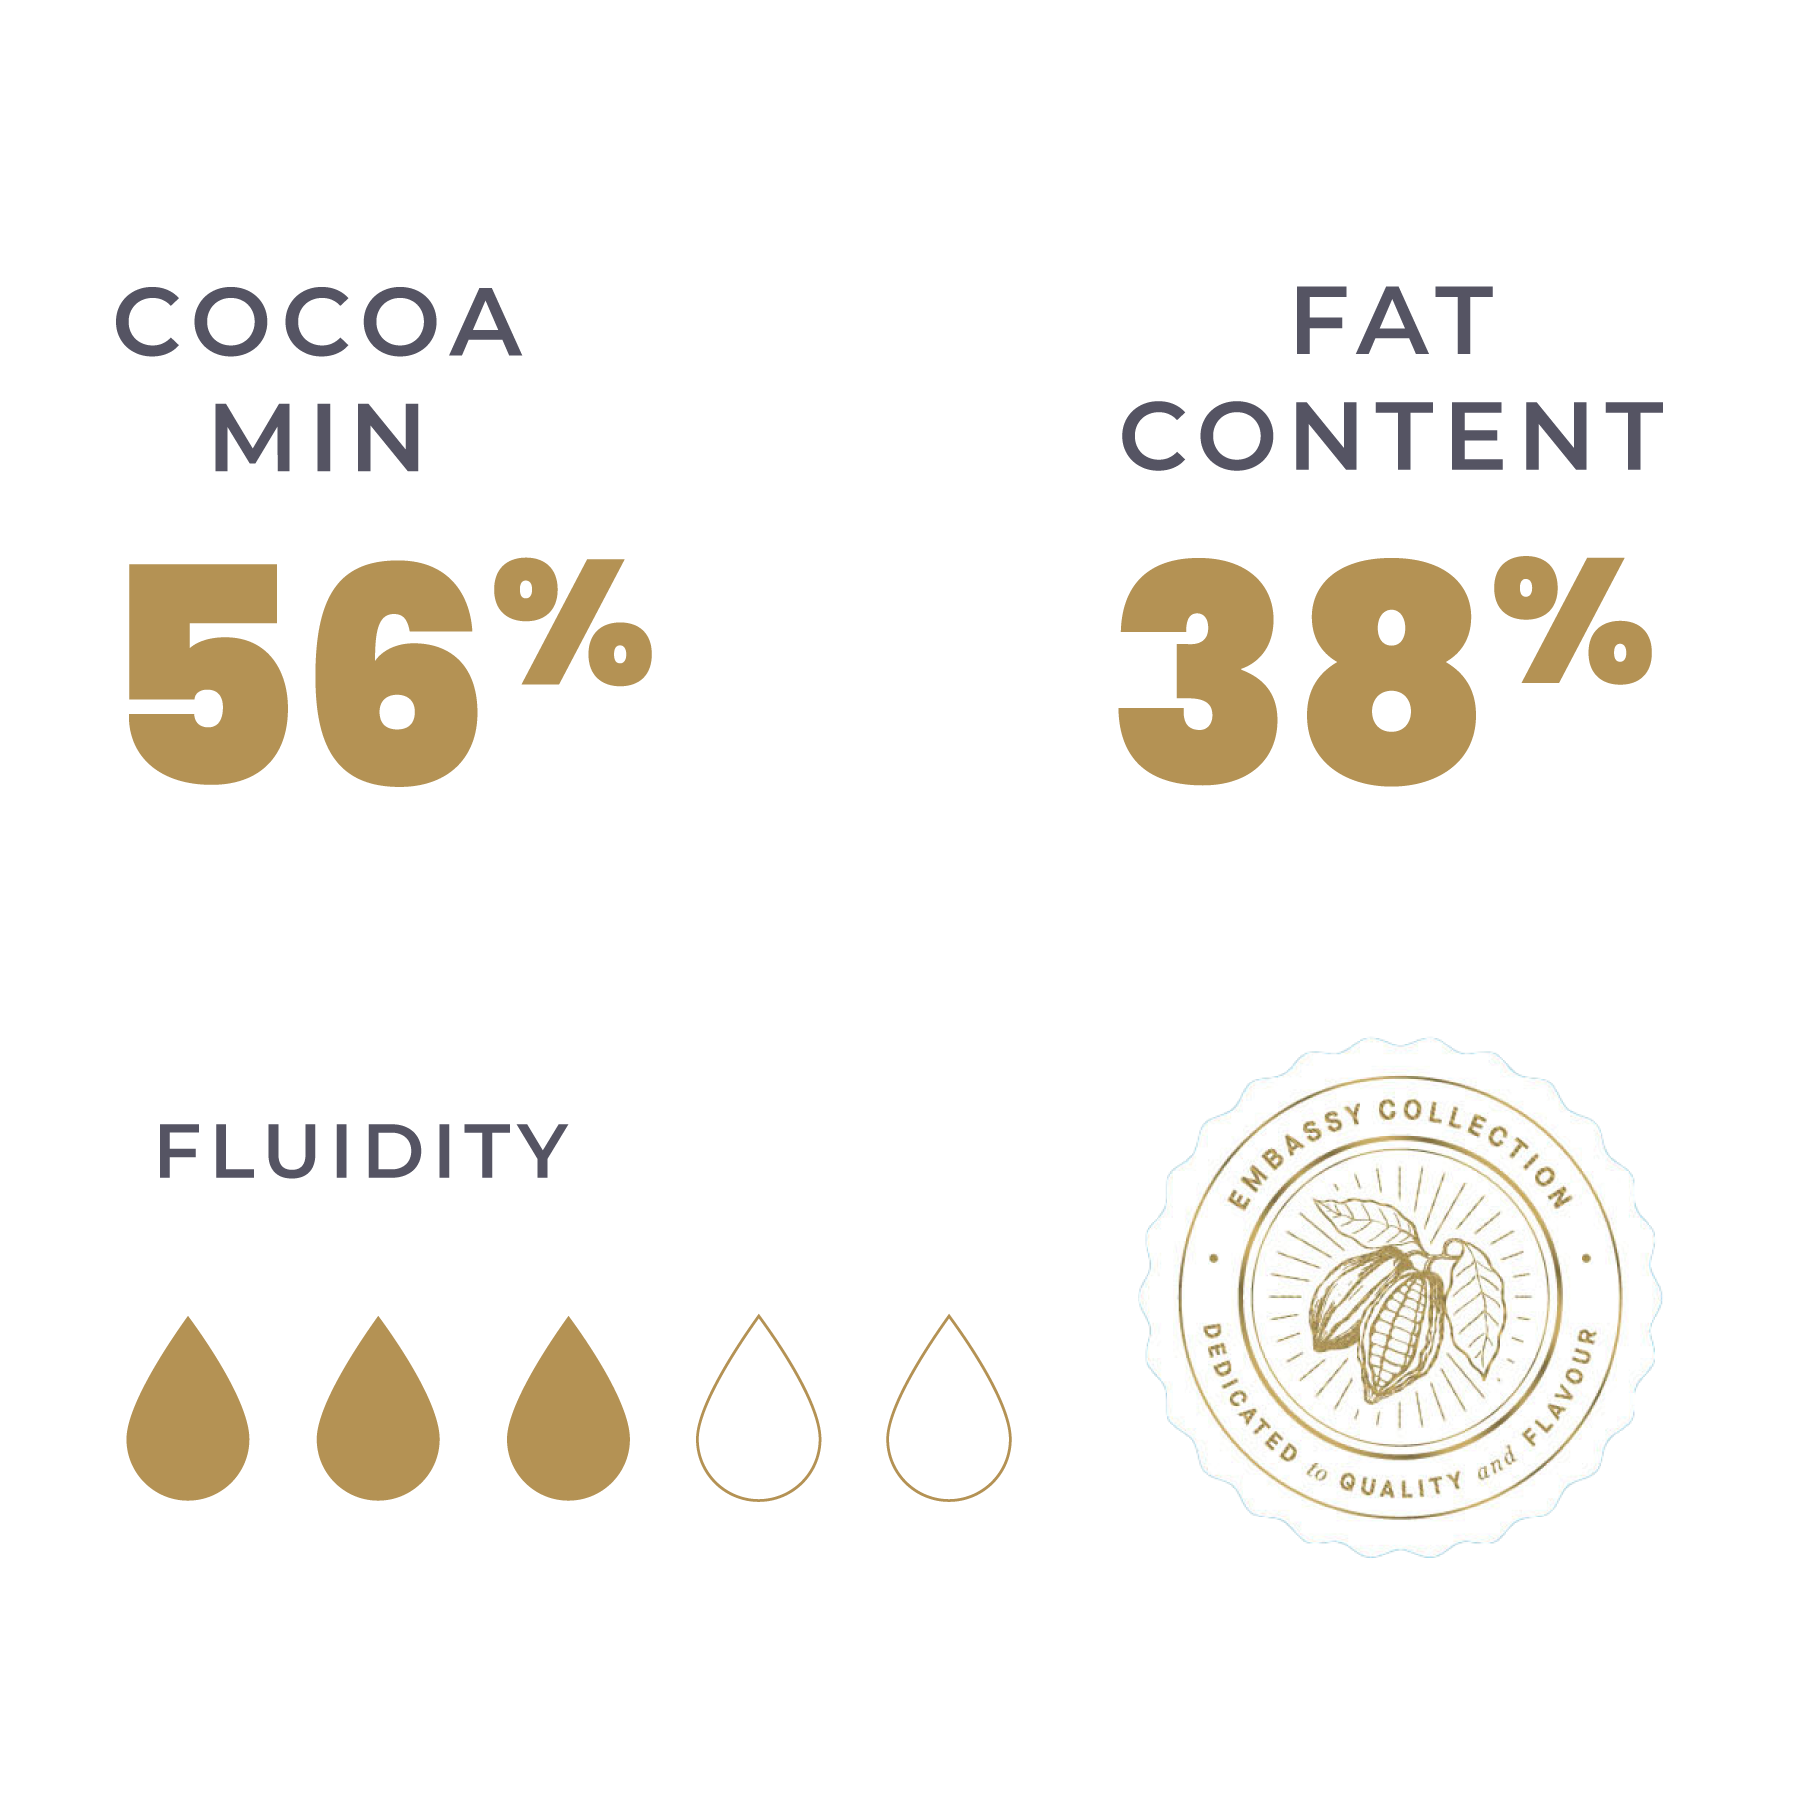 Cocoa & Fat content information for Embassy Equatorial Blend Dark Chocolate Couverture 2.5kg (SKU: 8994592013079)